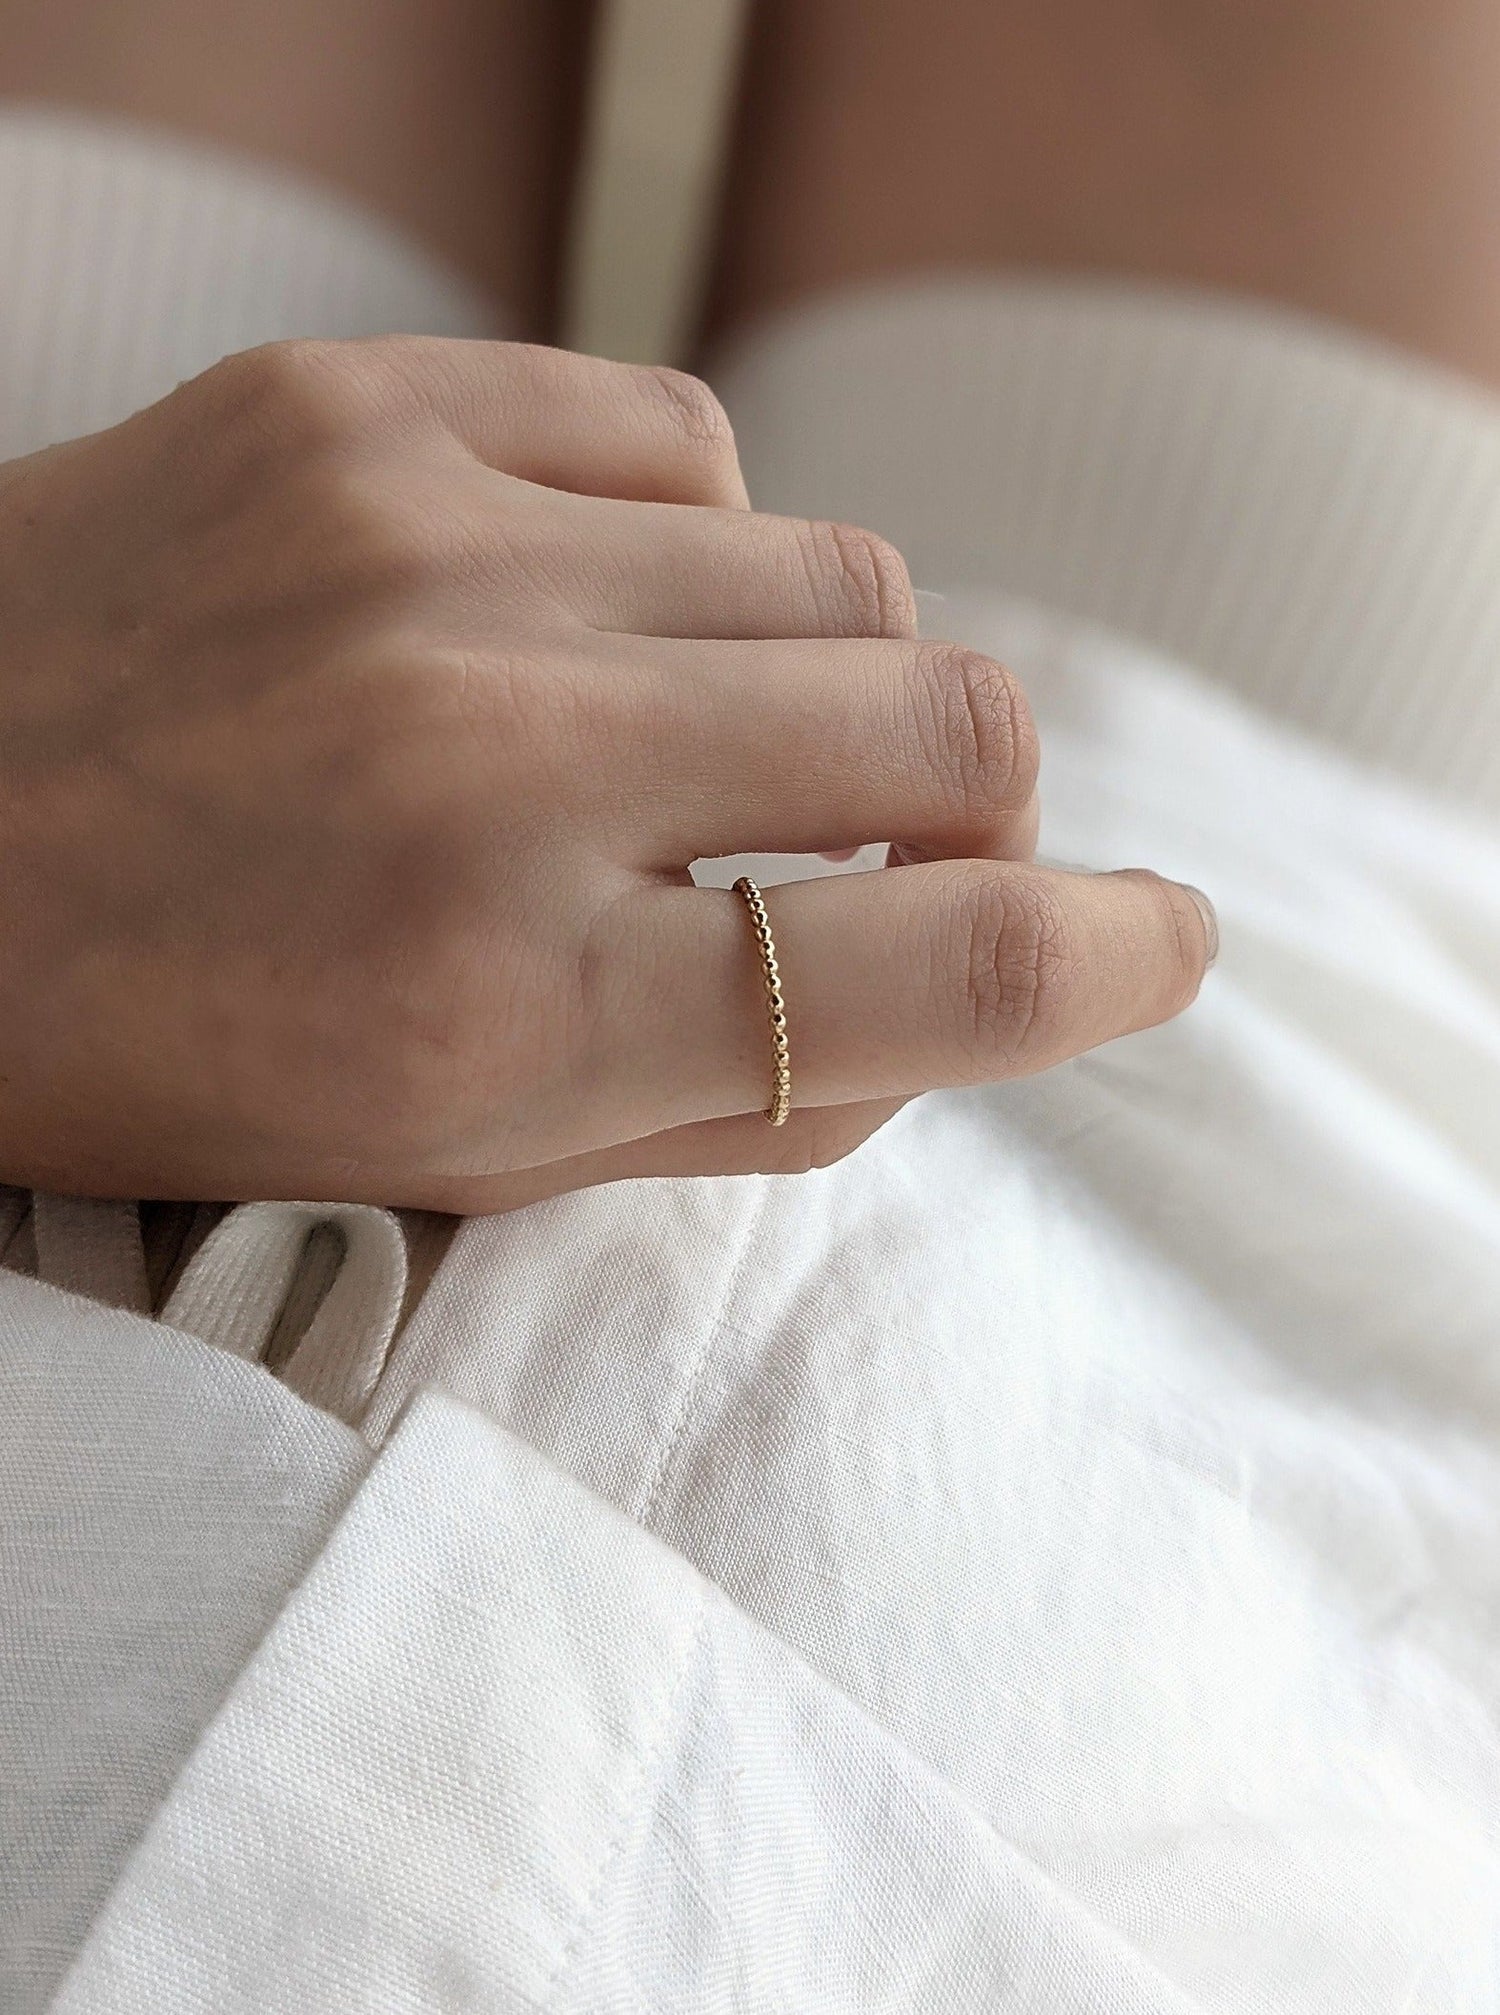 Dainty Beaded Ring Layer the Love